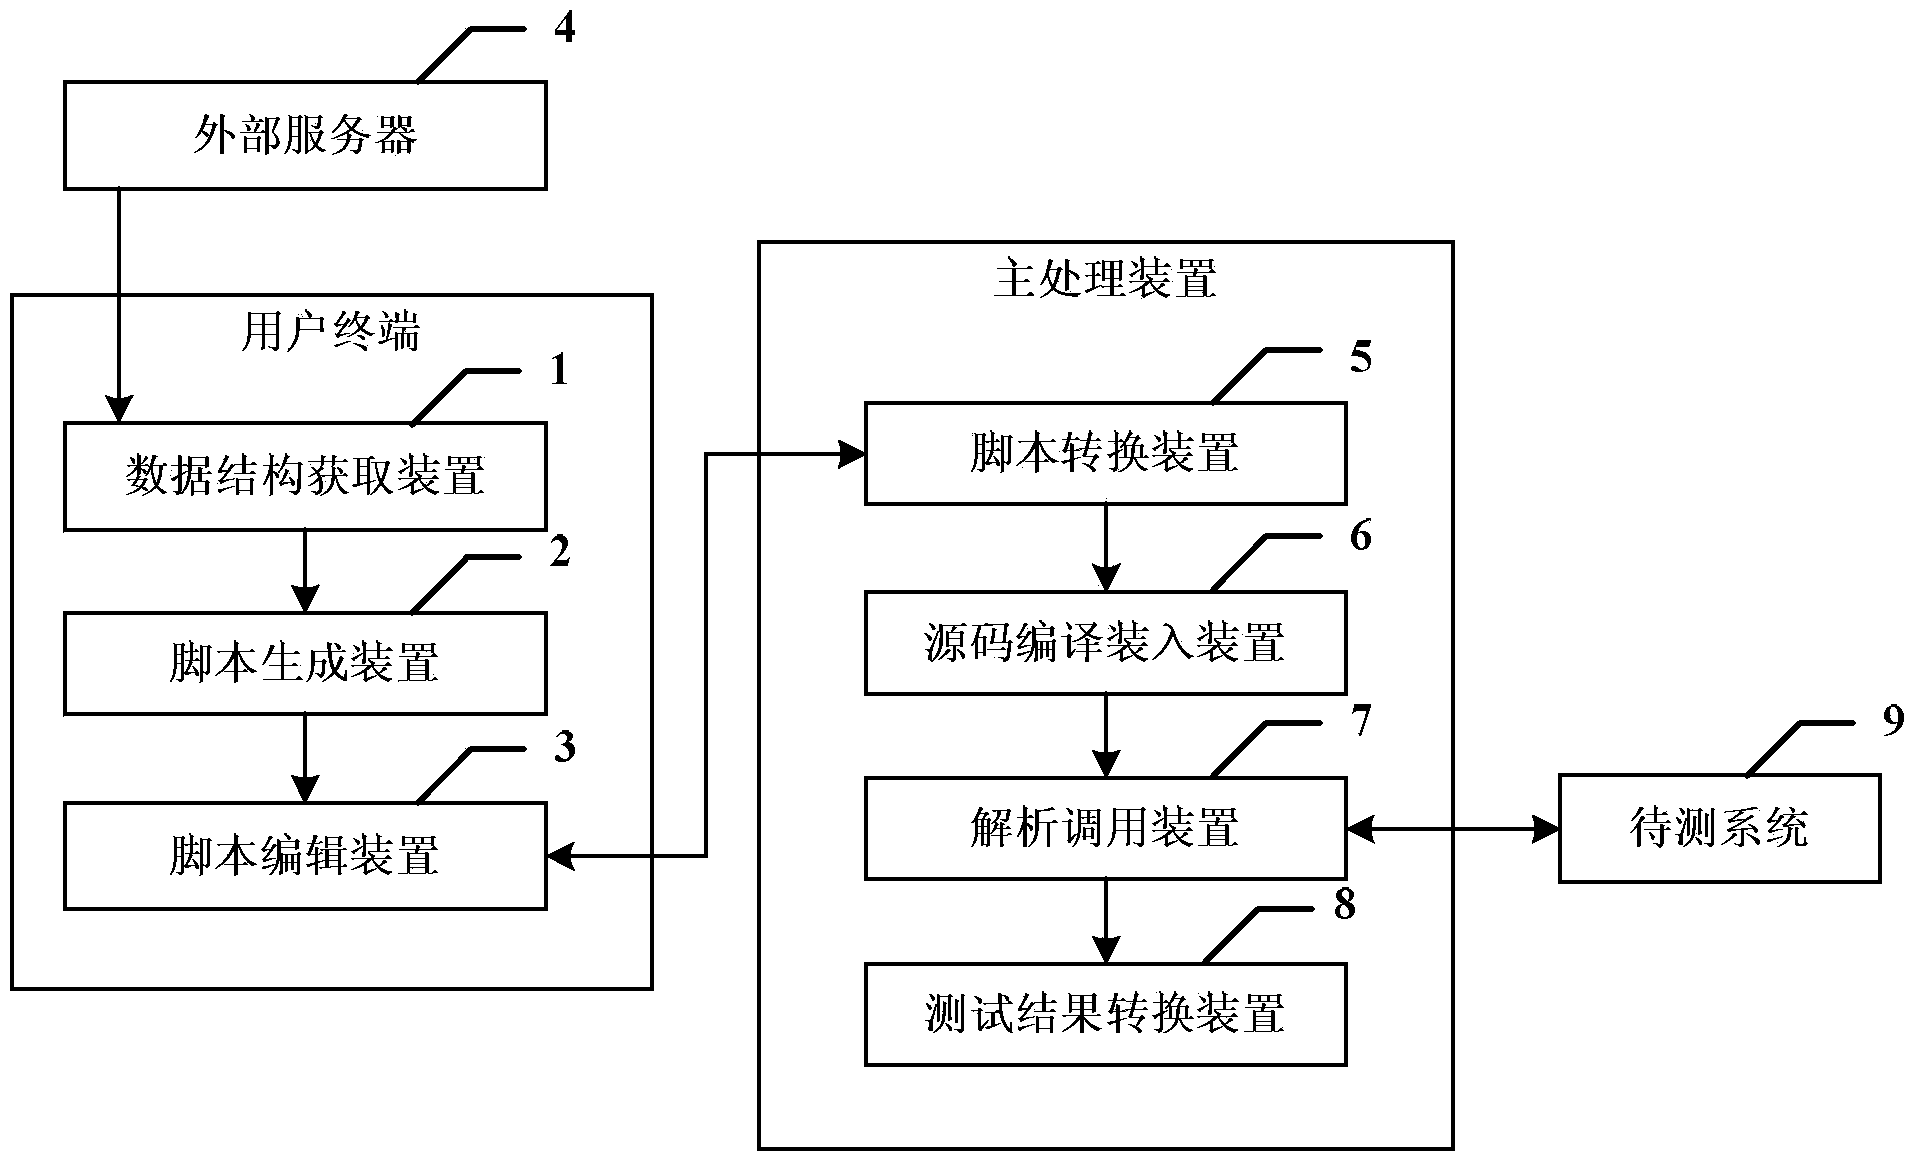 Test script processing device, system and method